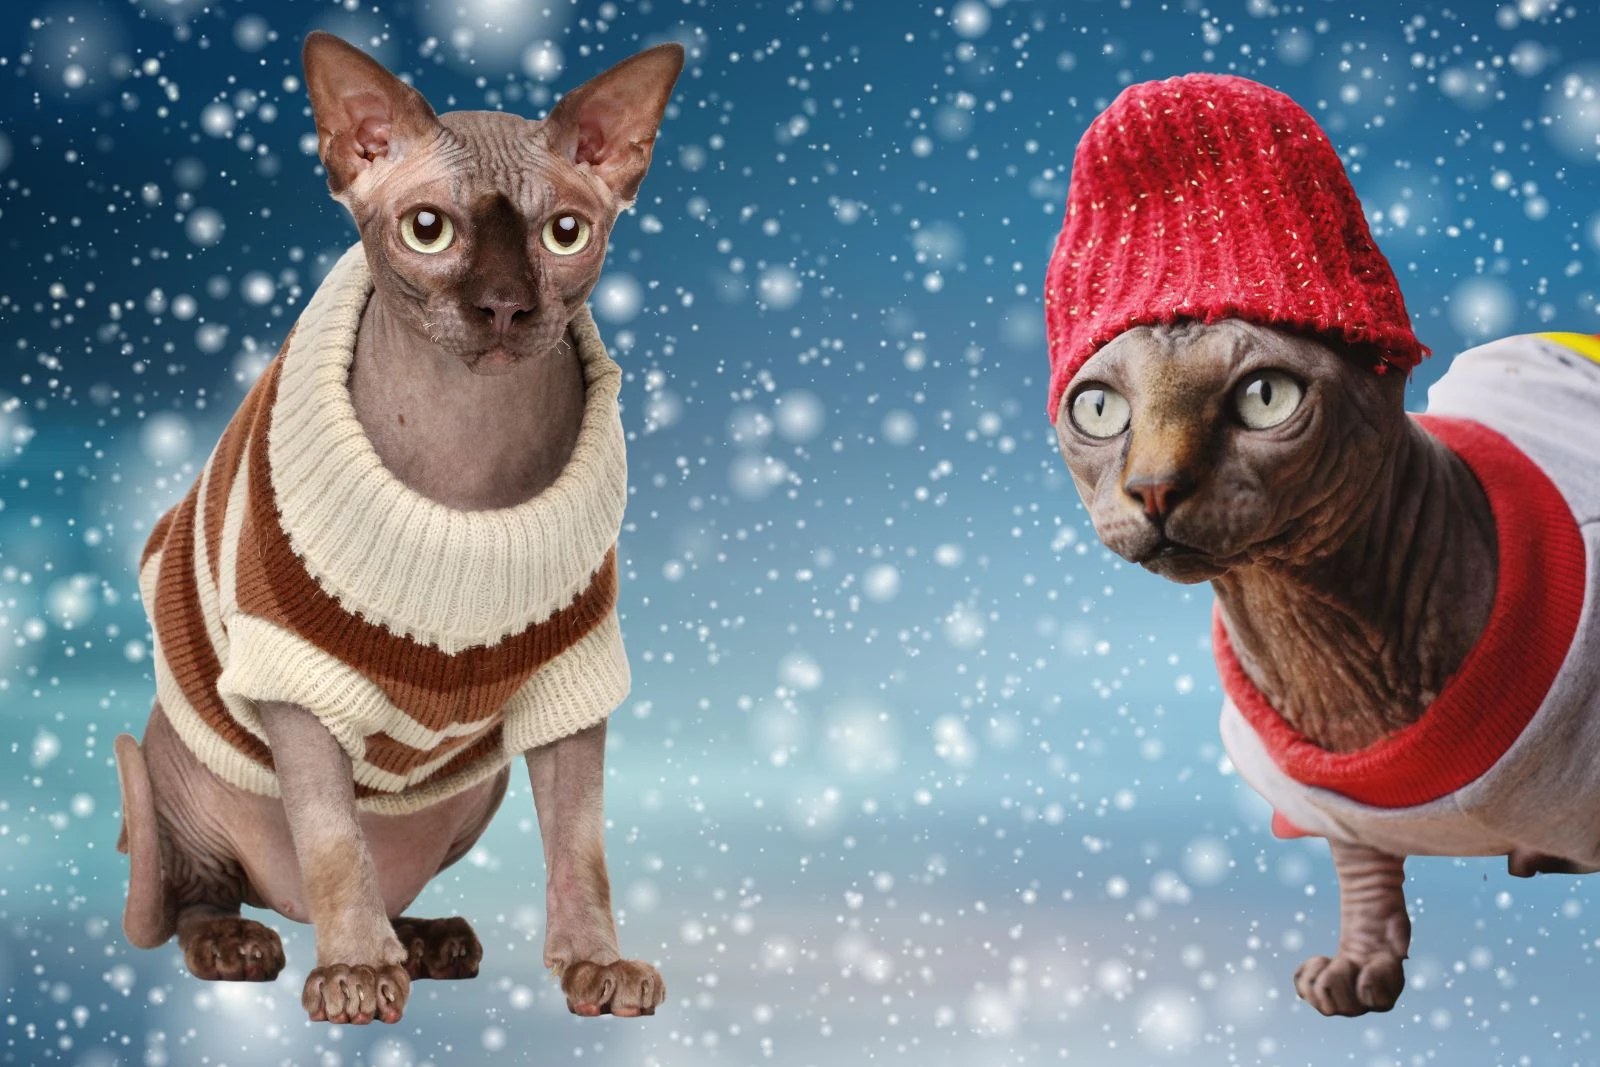 Sweater for Cat, Sphynx Cat Sweater, College Style Cat Sweater